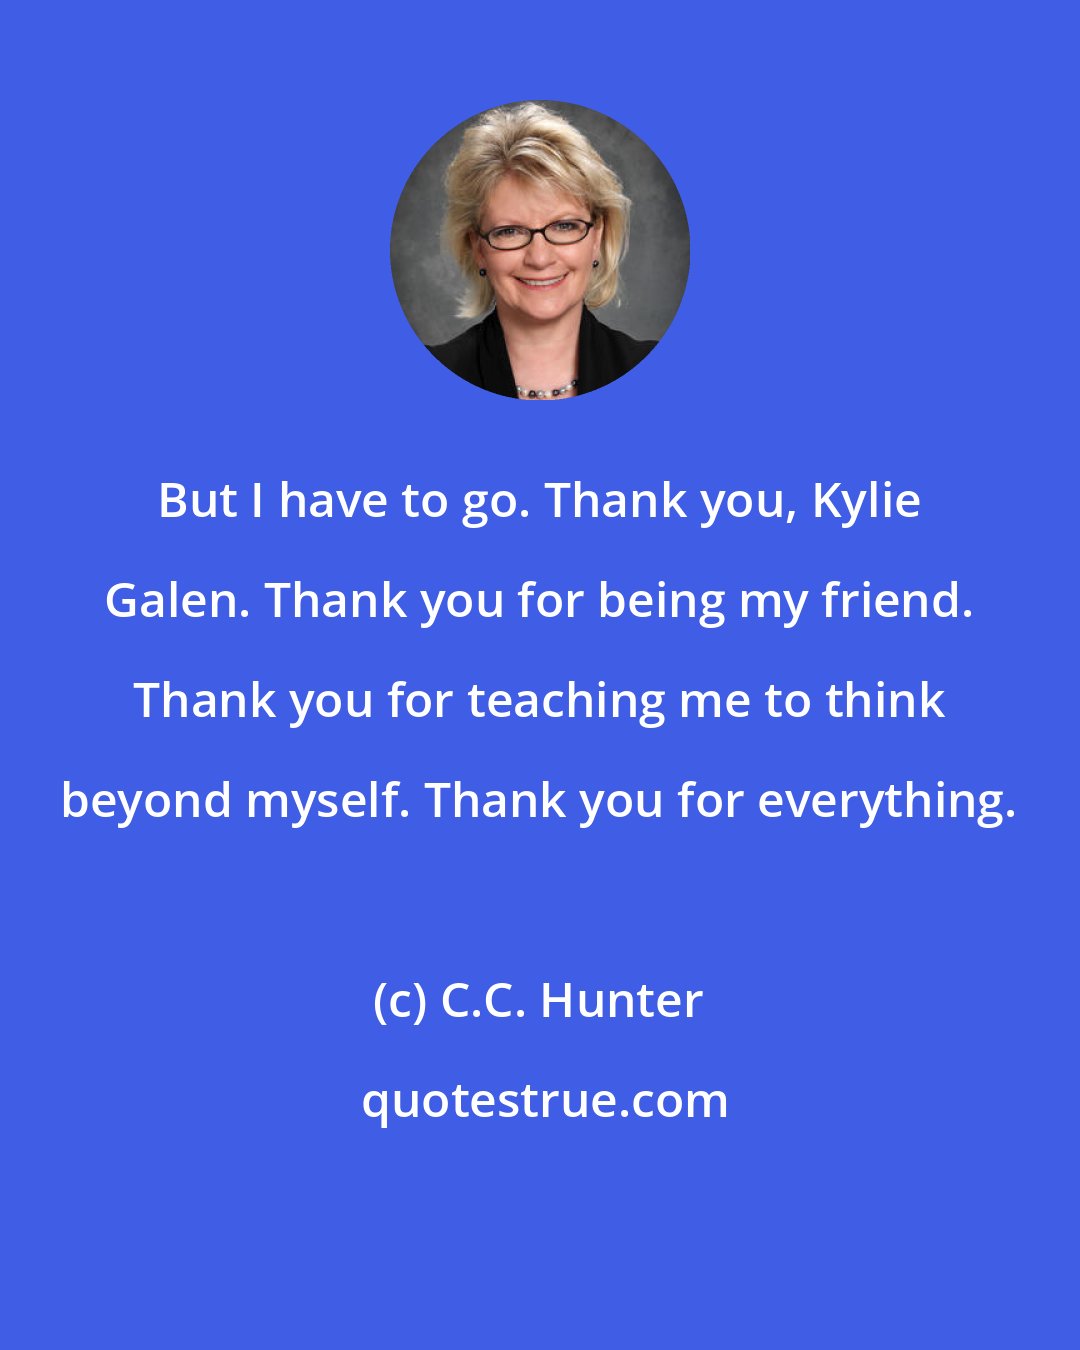 C.C. Hunter: But I have to go. Thank you, Kylie Galen. Thank you for being my friend. Thank you for teaching me to think beyond myself. Thank you for everything.